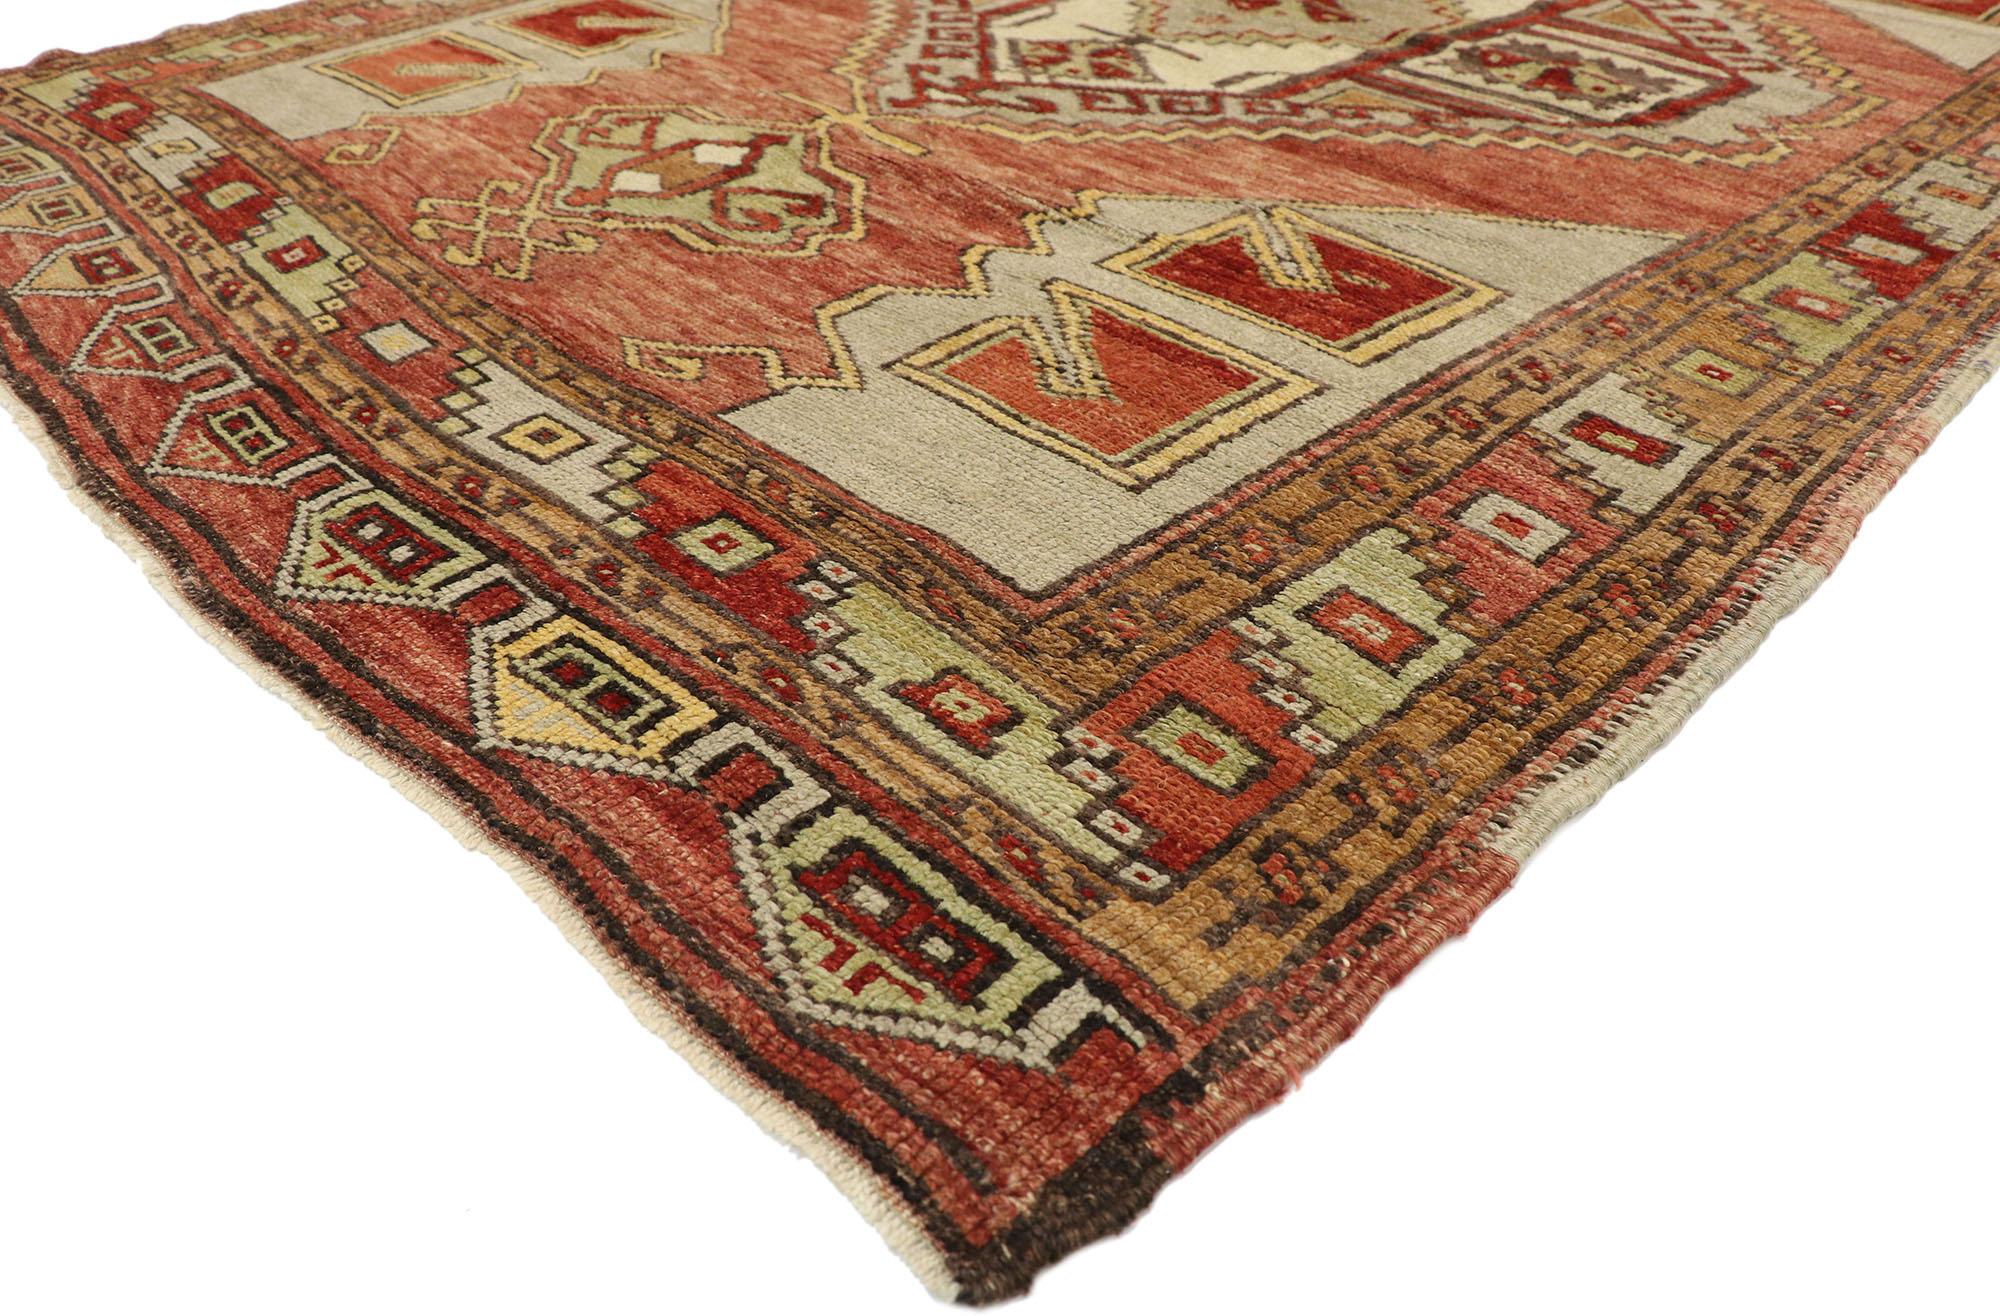 51799, vintage Turkish Oushak Gallery rug with Craftsman style, wide hallway runner. This hand knotted wool vintage Turkish Oushak gallery rug features two stepped hexagonal medallions with anchor pendants floating on an abrashed brick red field.